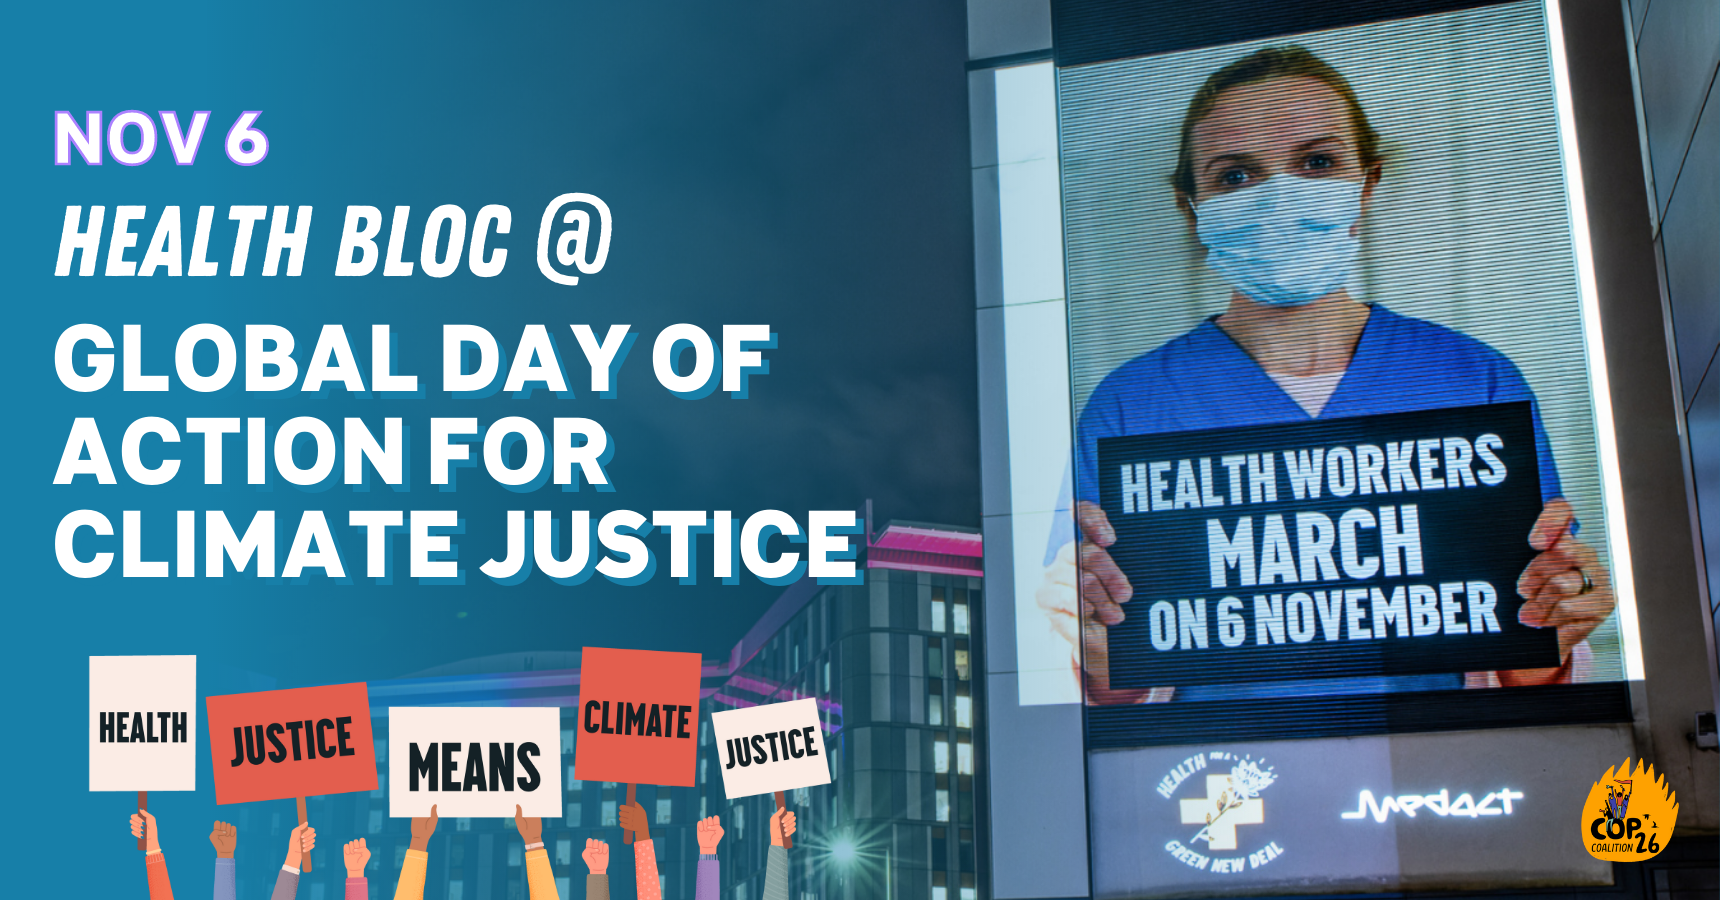 Health blocs @ Global Day of Action for Climate Justice